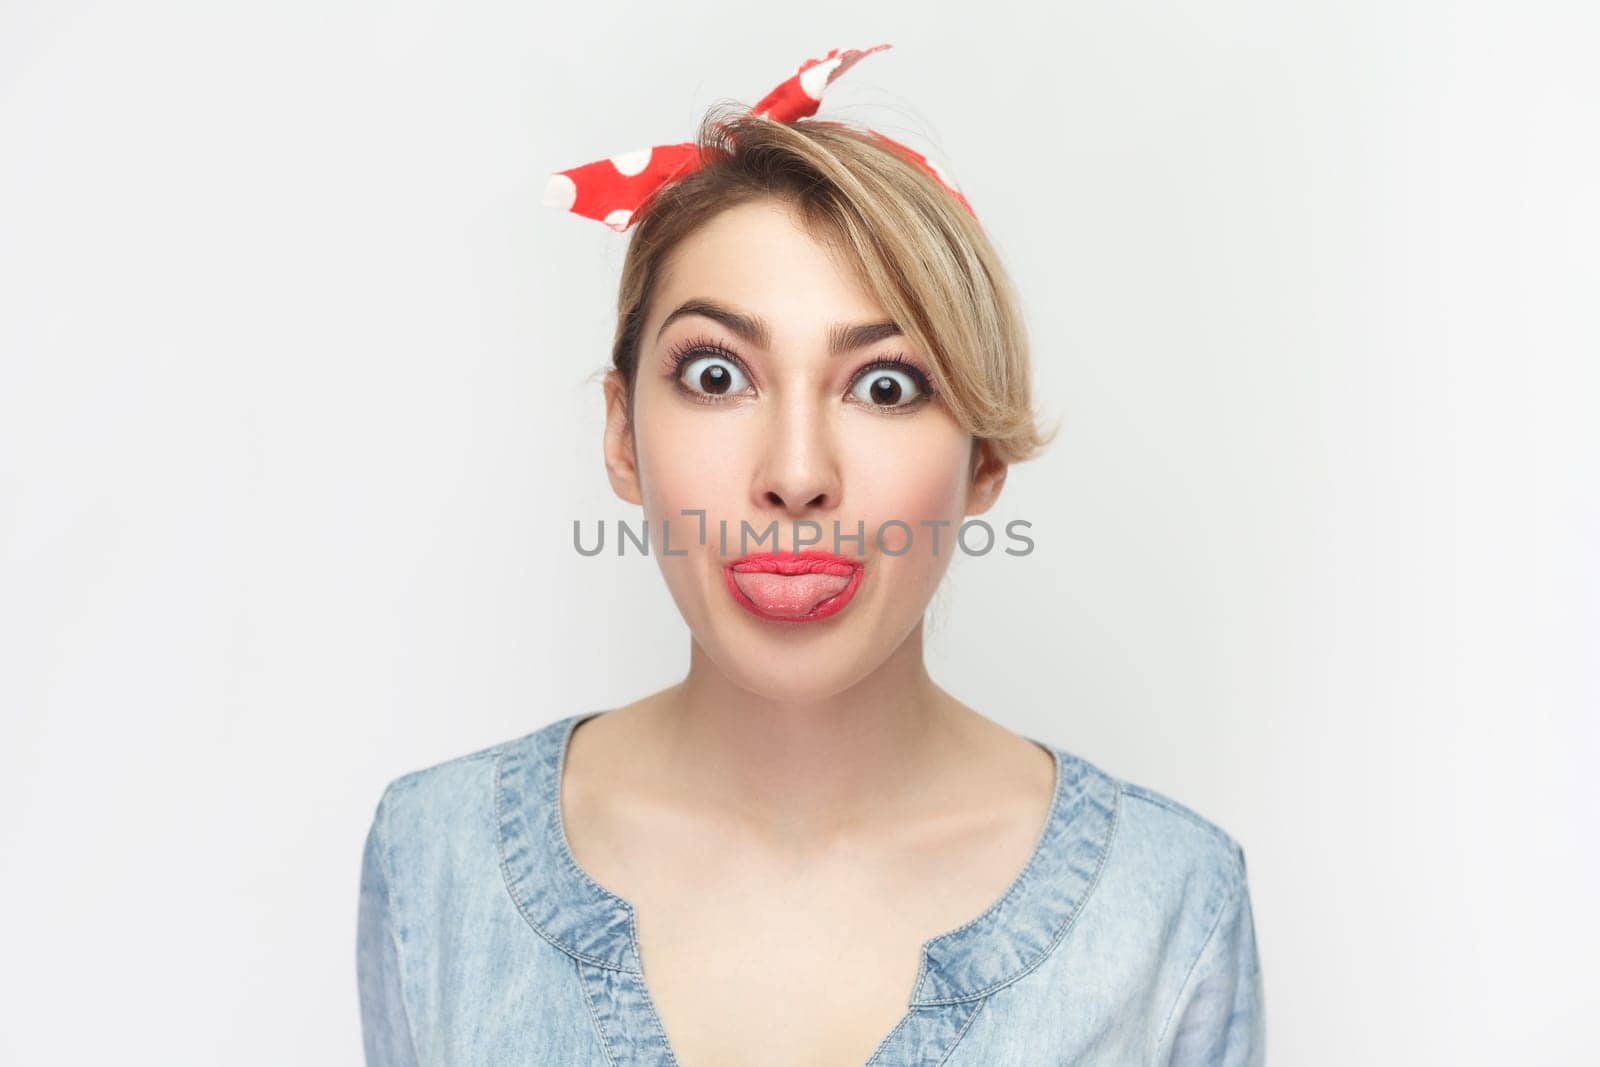 Funny foolish woman in denim shirt and red headband standing sticking tongue out, looking at camera. by Khosro1